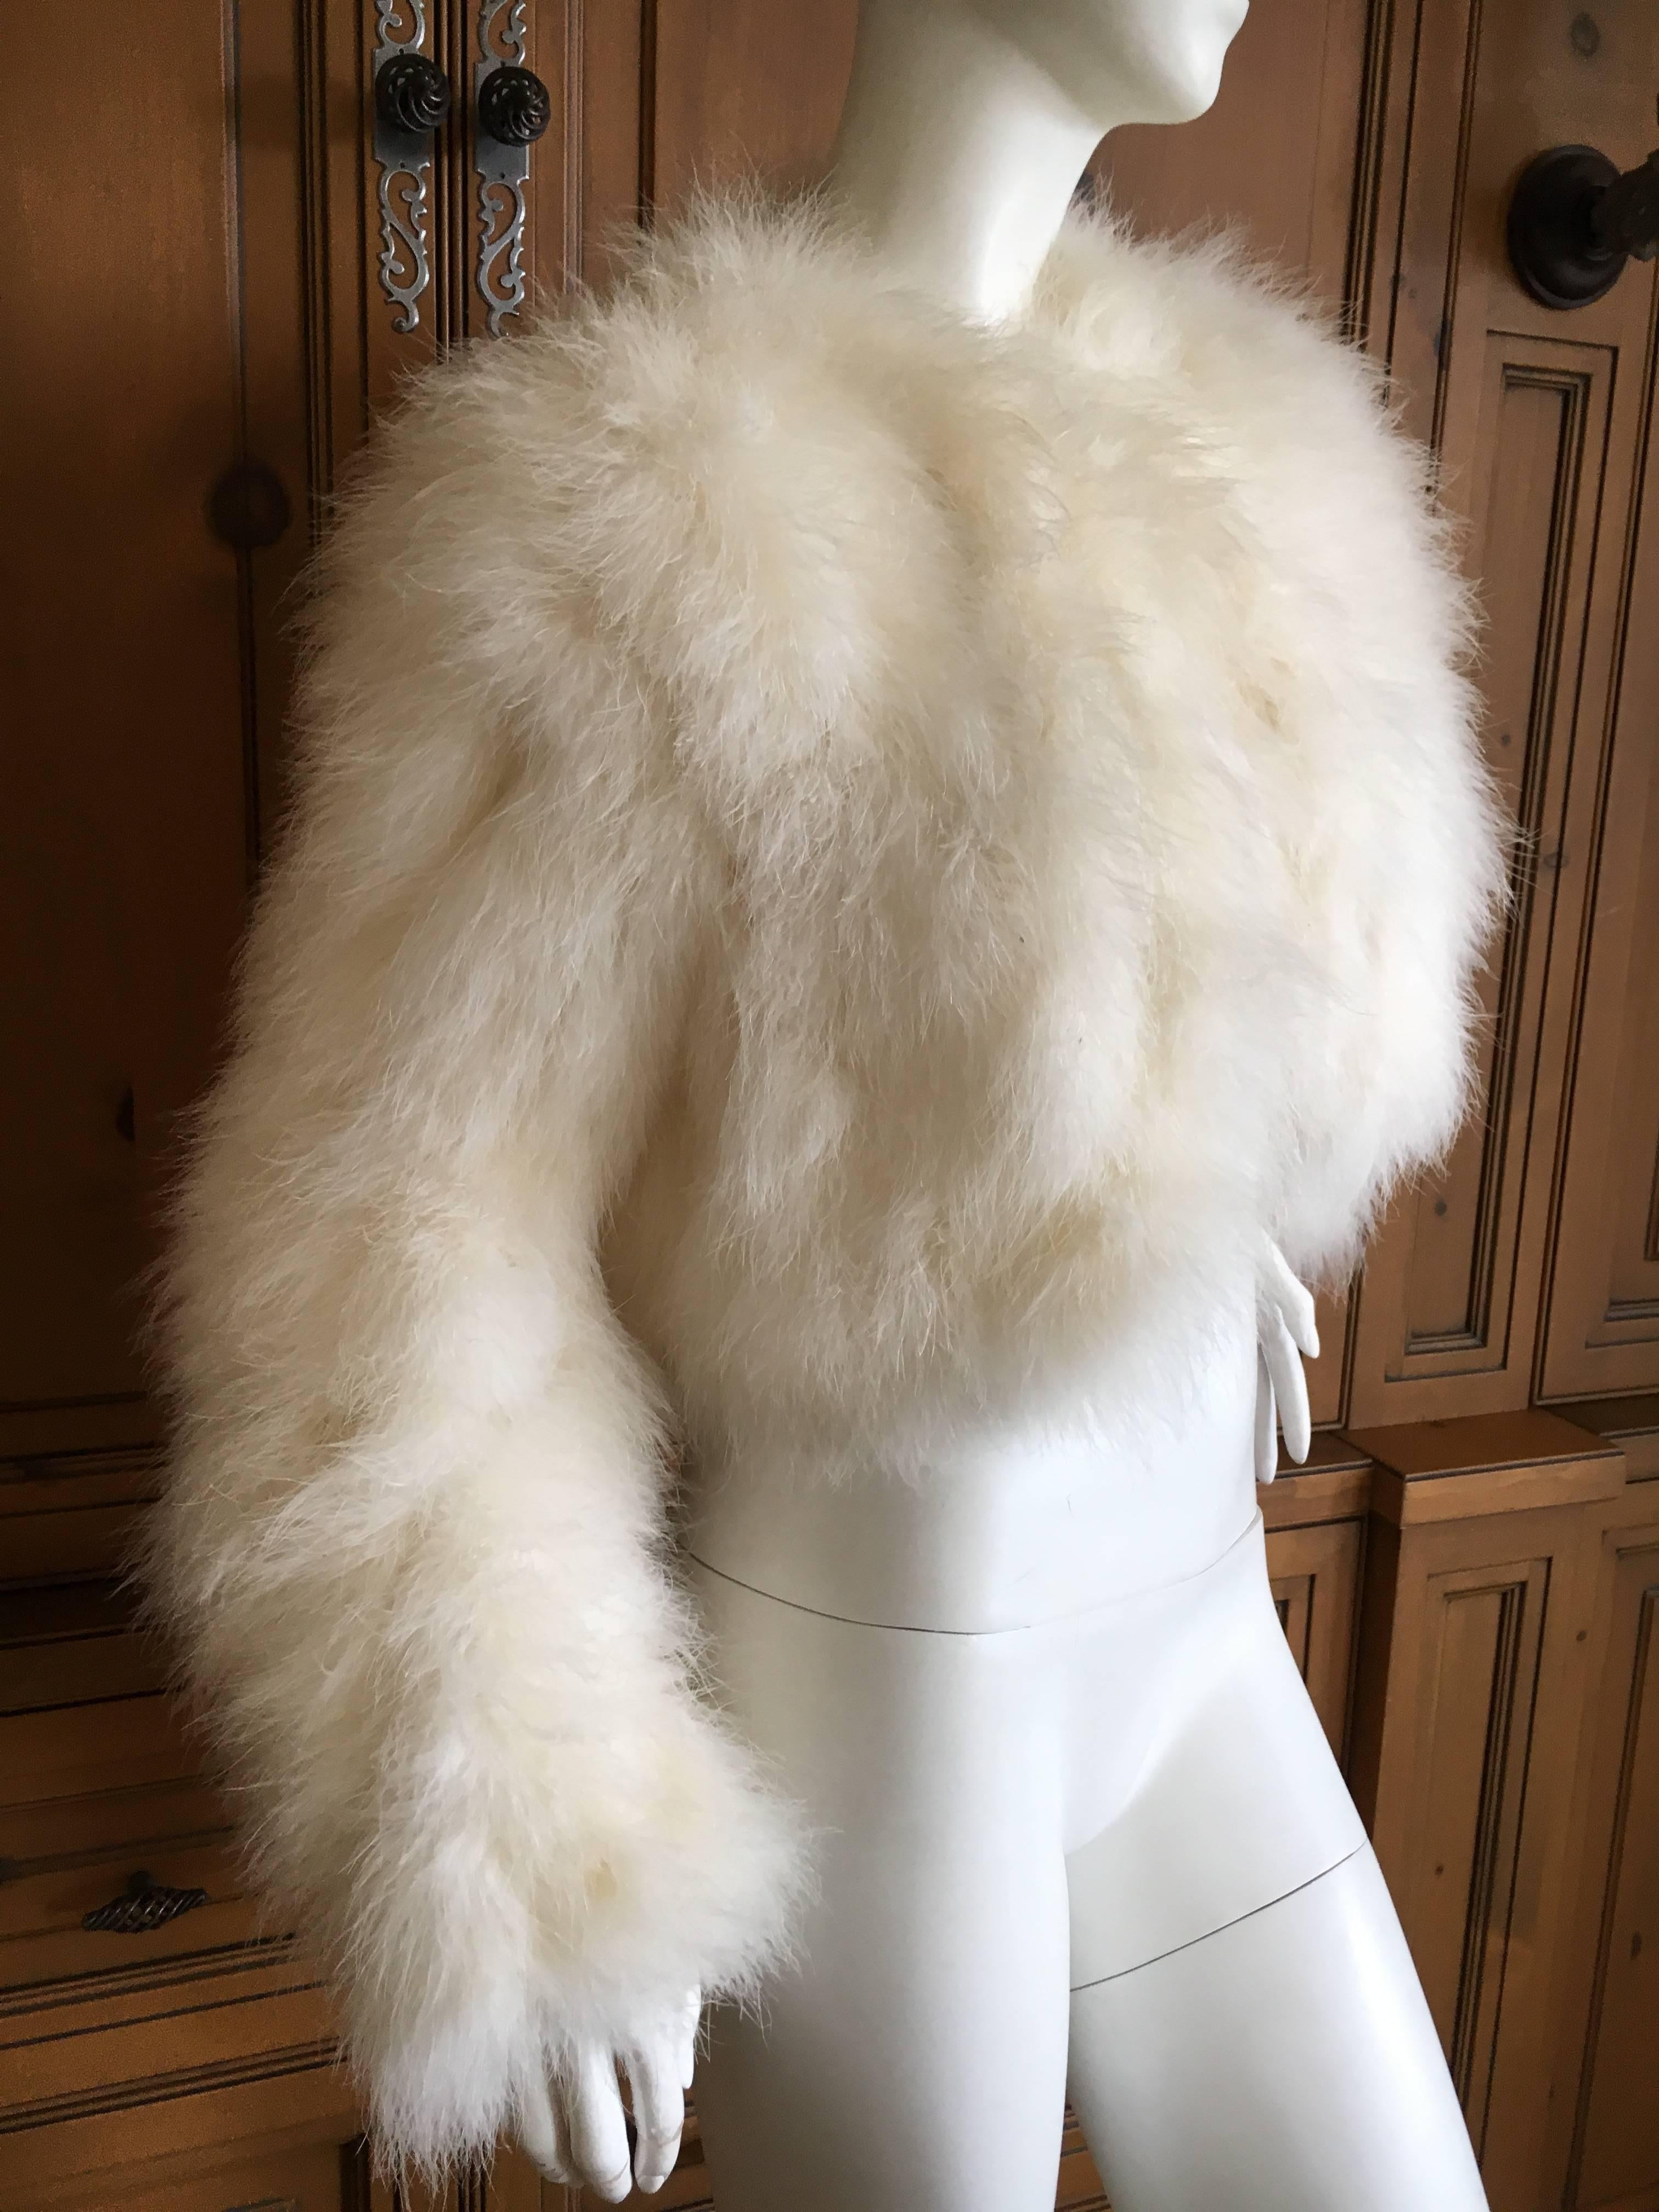 Saks Fifth Avenue 1960 White Maribou Feather Jacket.
Size M
Bust 40
Length 15